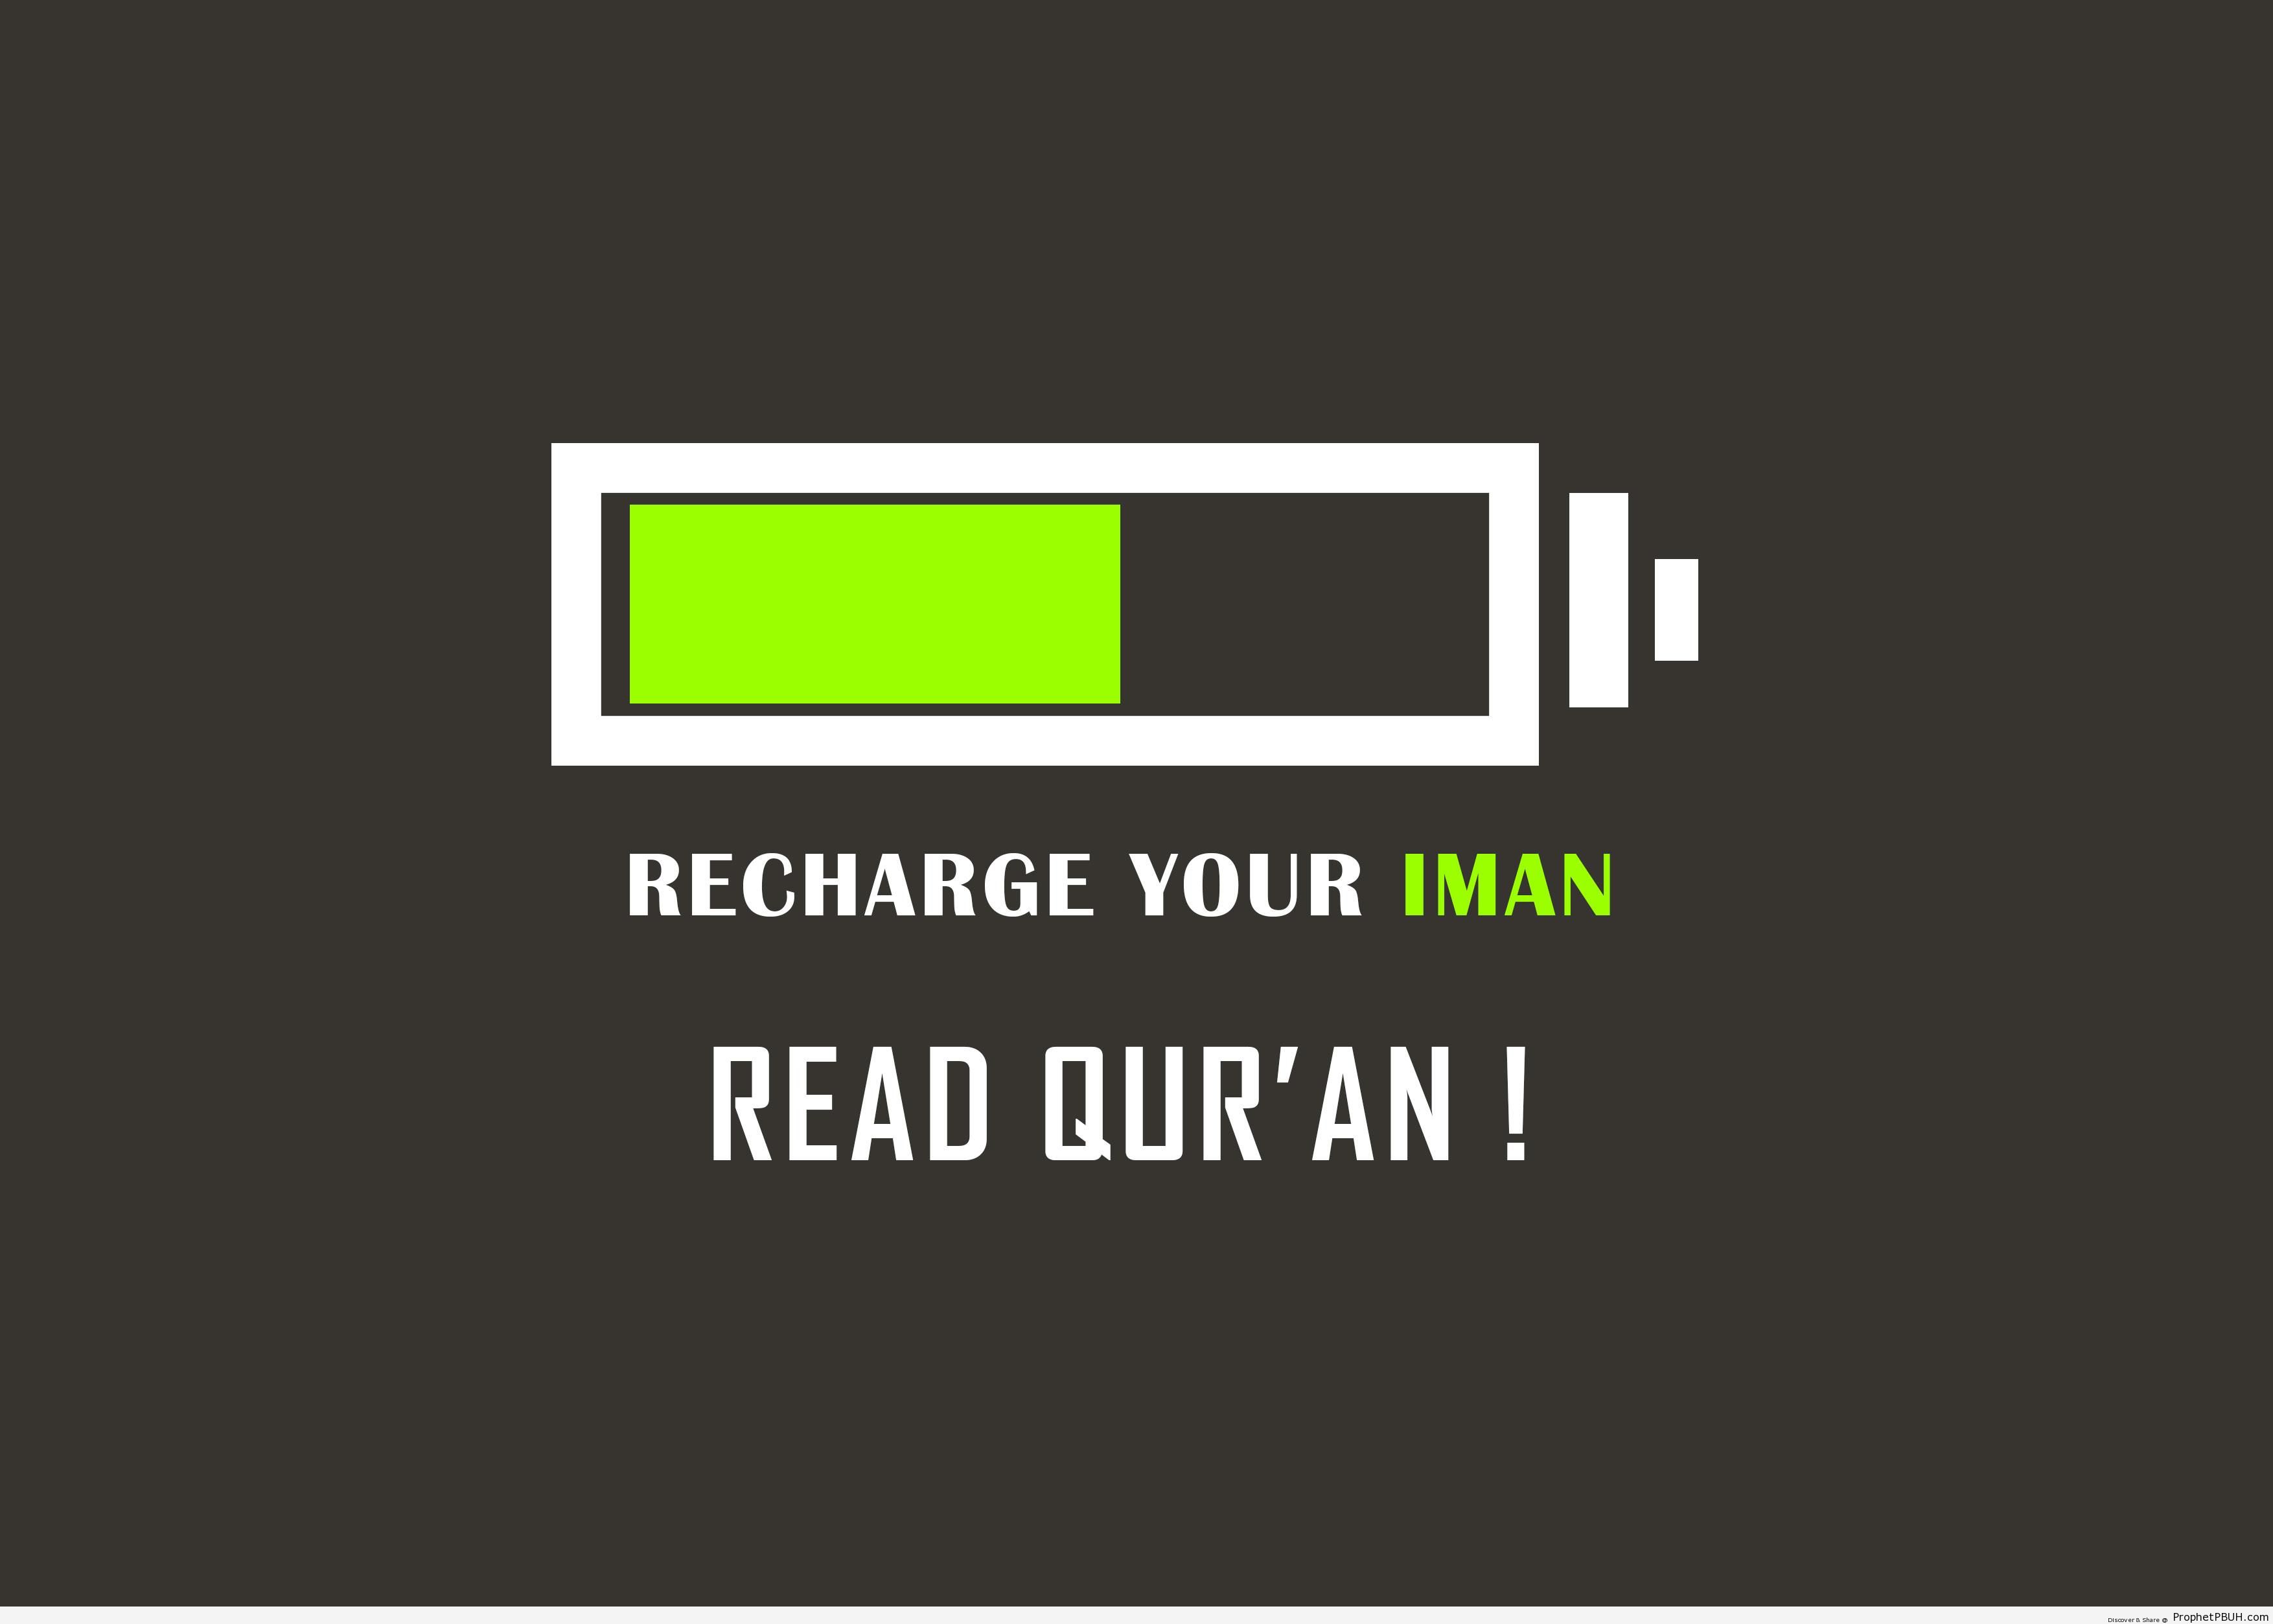 Read Quran, Recharge Your Iman - Islamic Quotes About Iman (Faith in Allah) 